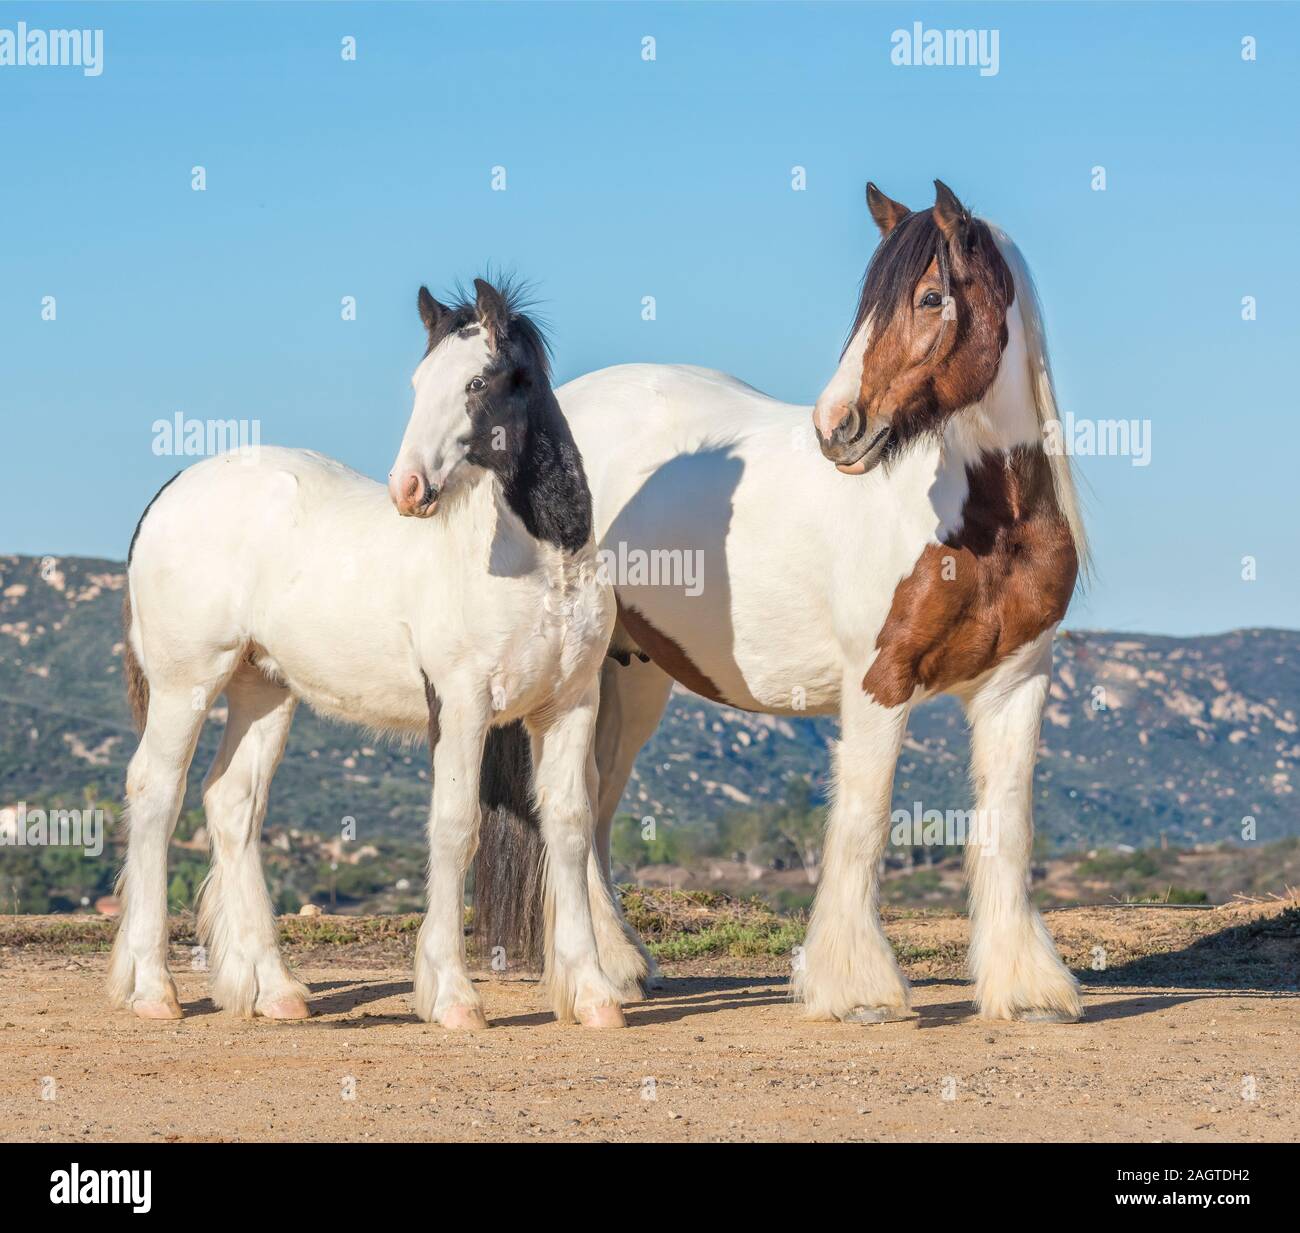 Gypsy Vanner Horse colt  weanling foal with mare Stock Photo